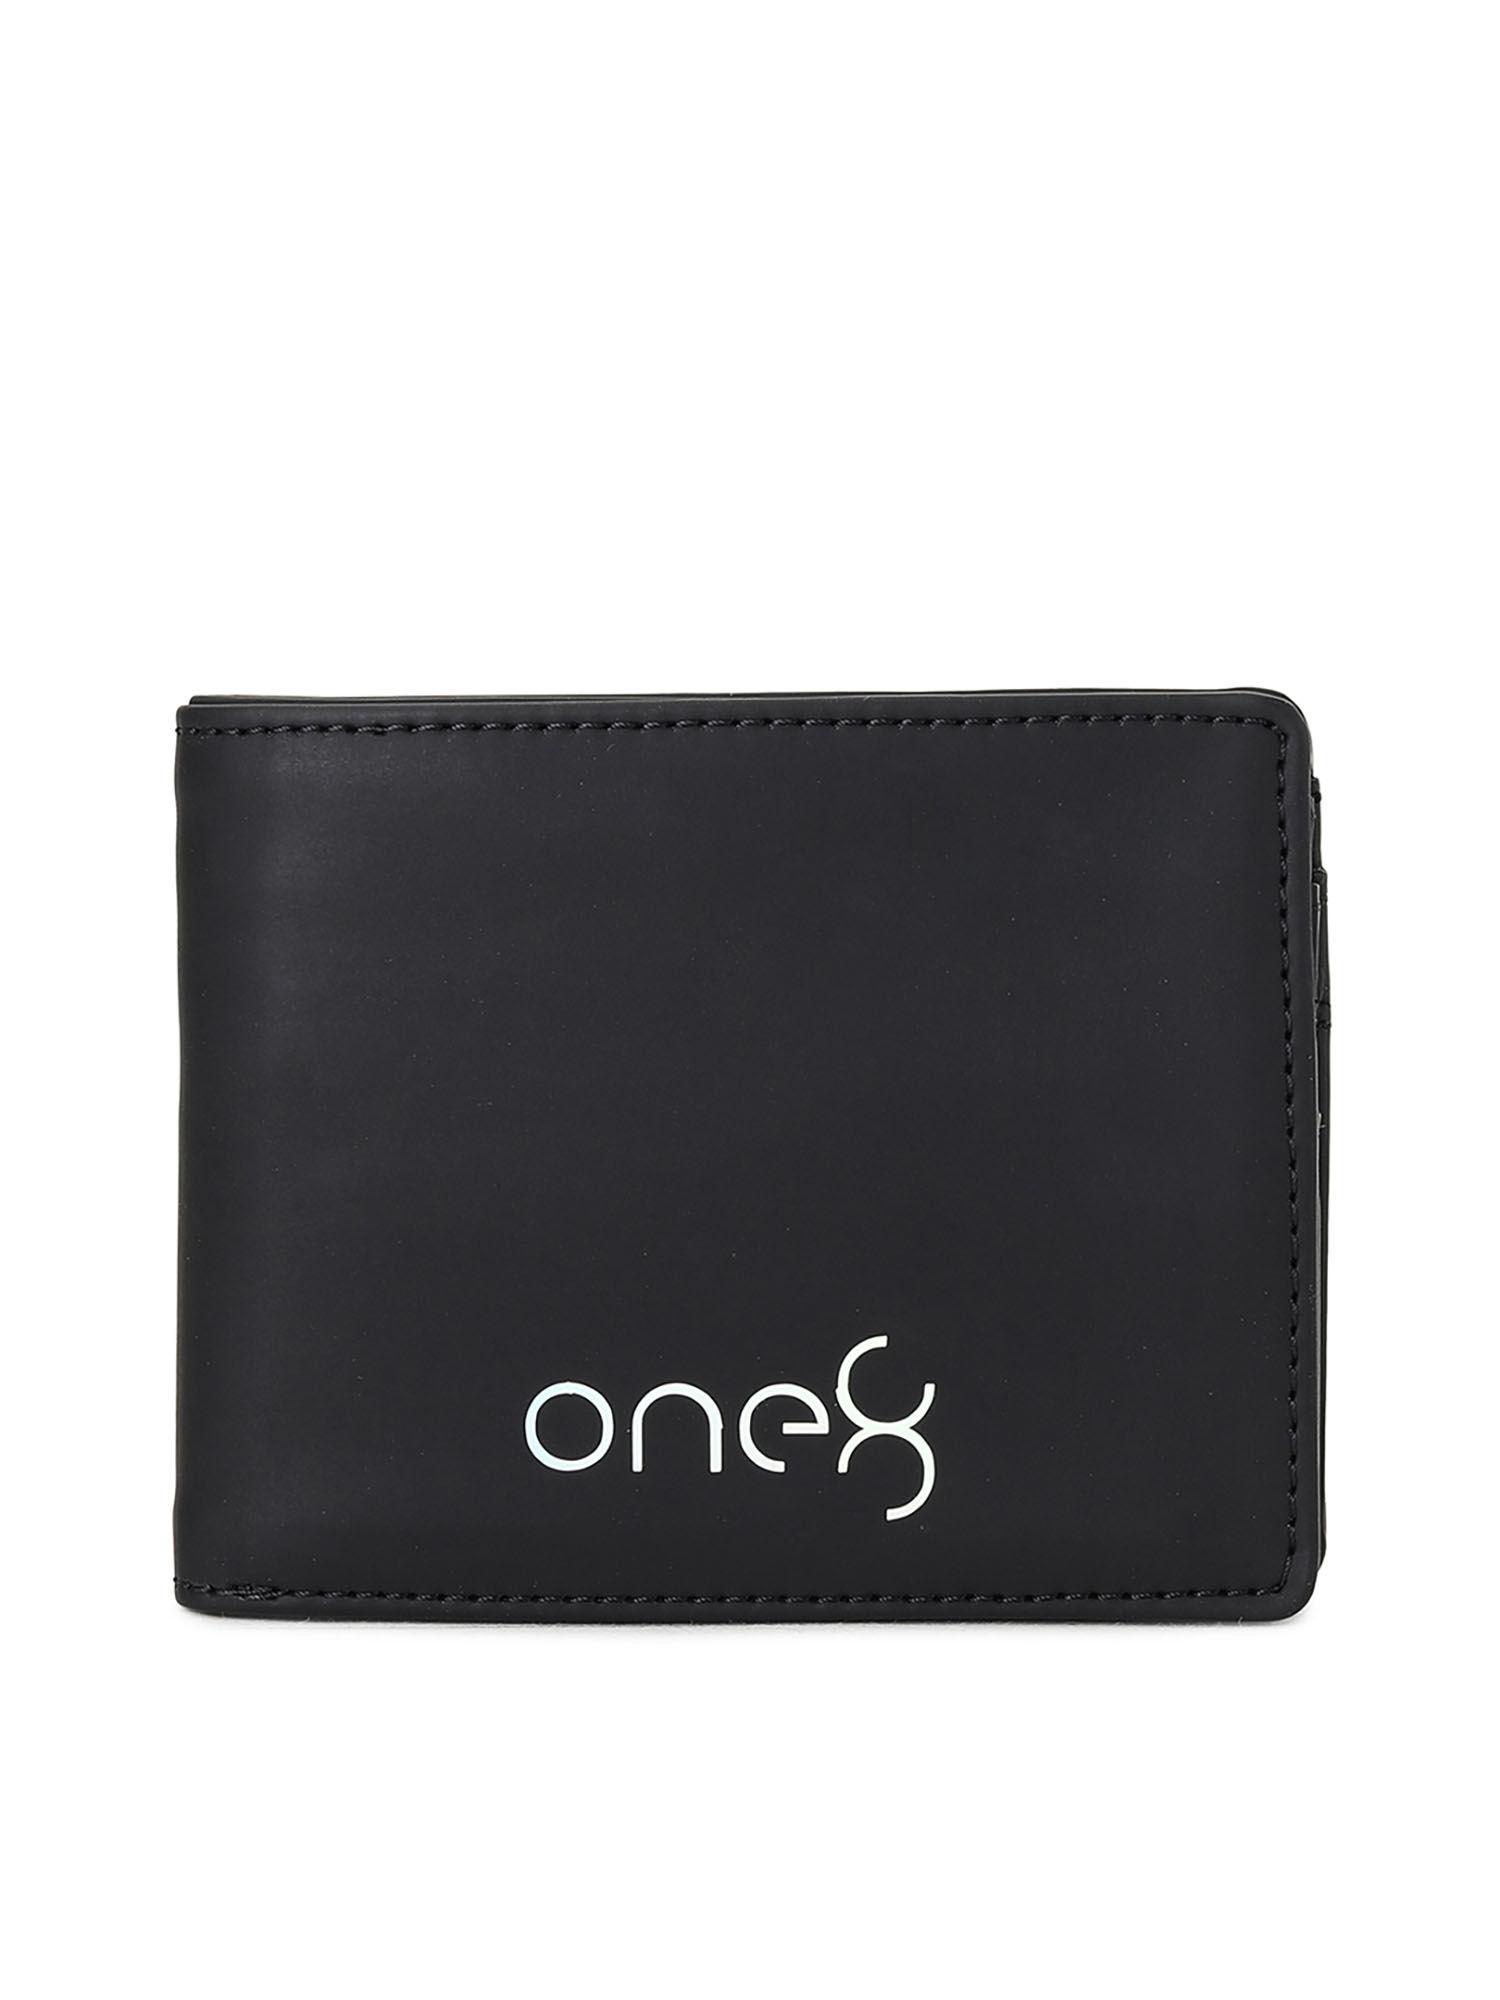 x One8 Stylised Mens Wallet